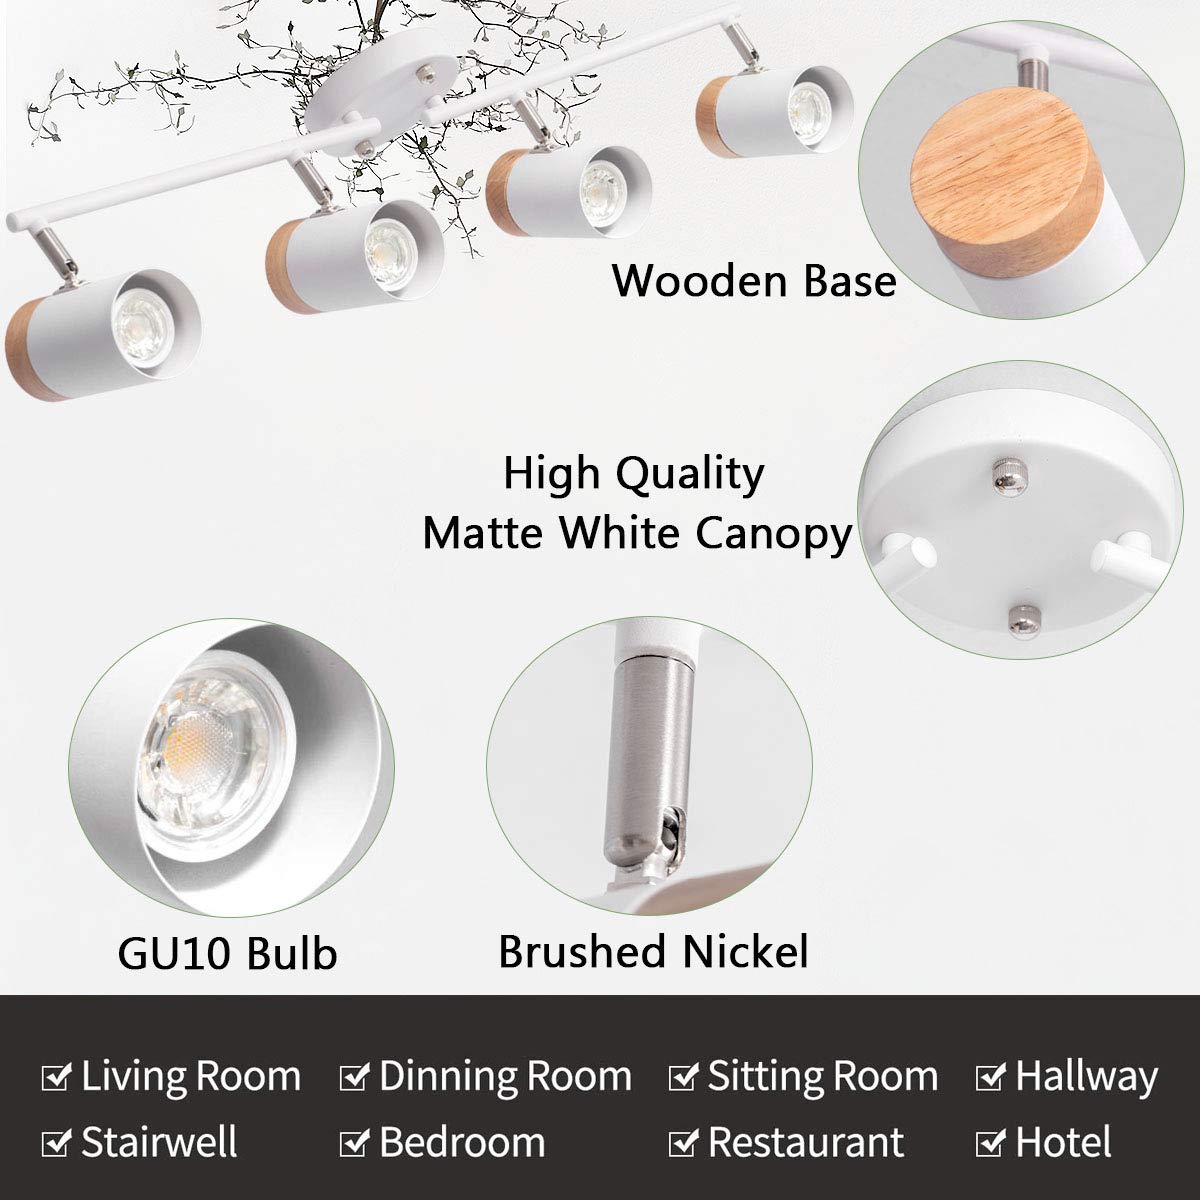 TeHenoo Adjustable Track Lighting Kit, 4-Lights Ceiling Light GU10 Bulb with Metal and Wood Shade for Living Room, Kitchen, Utility Room (White)